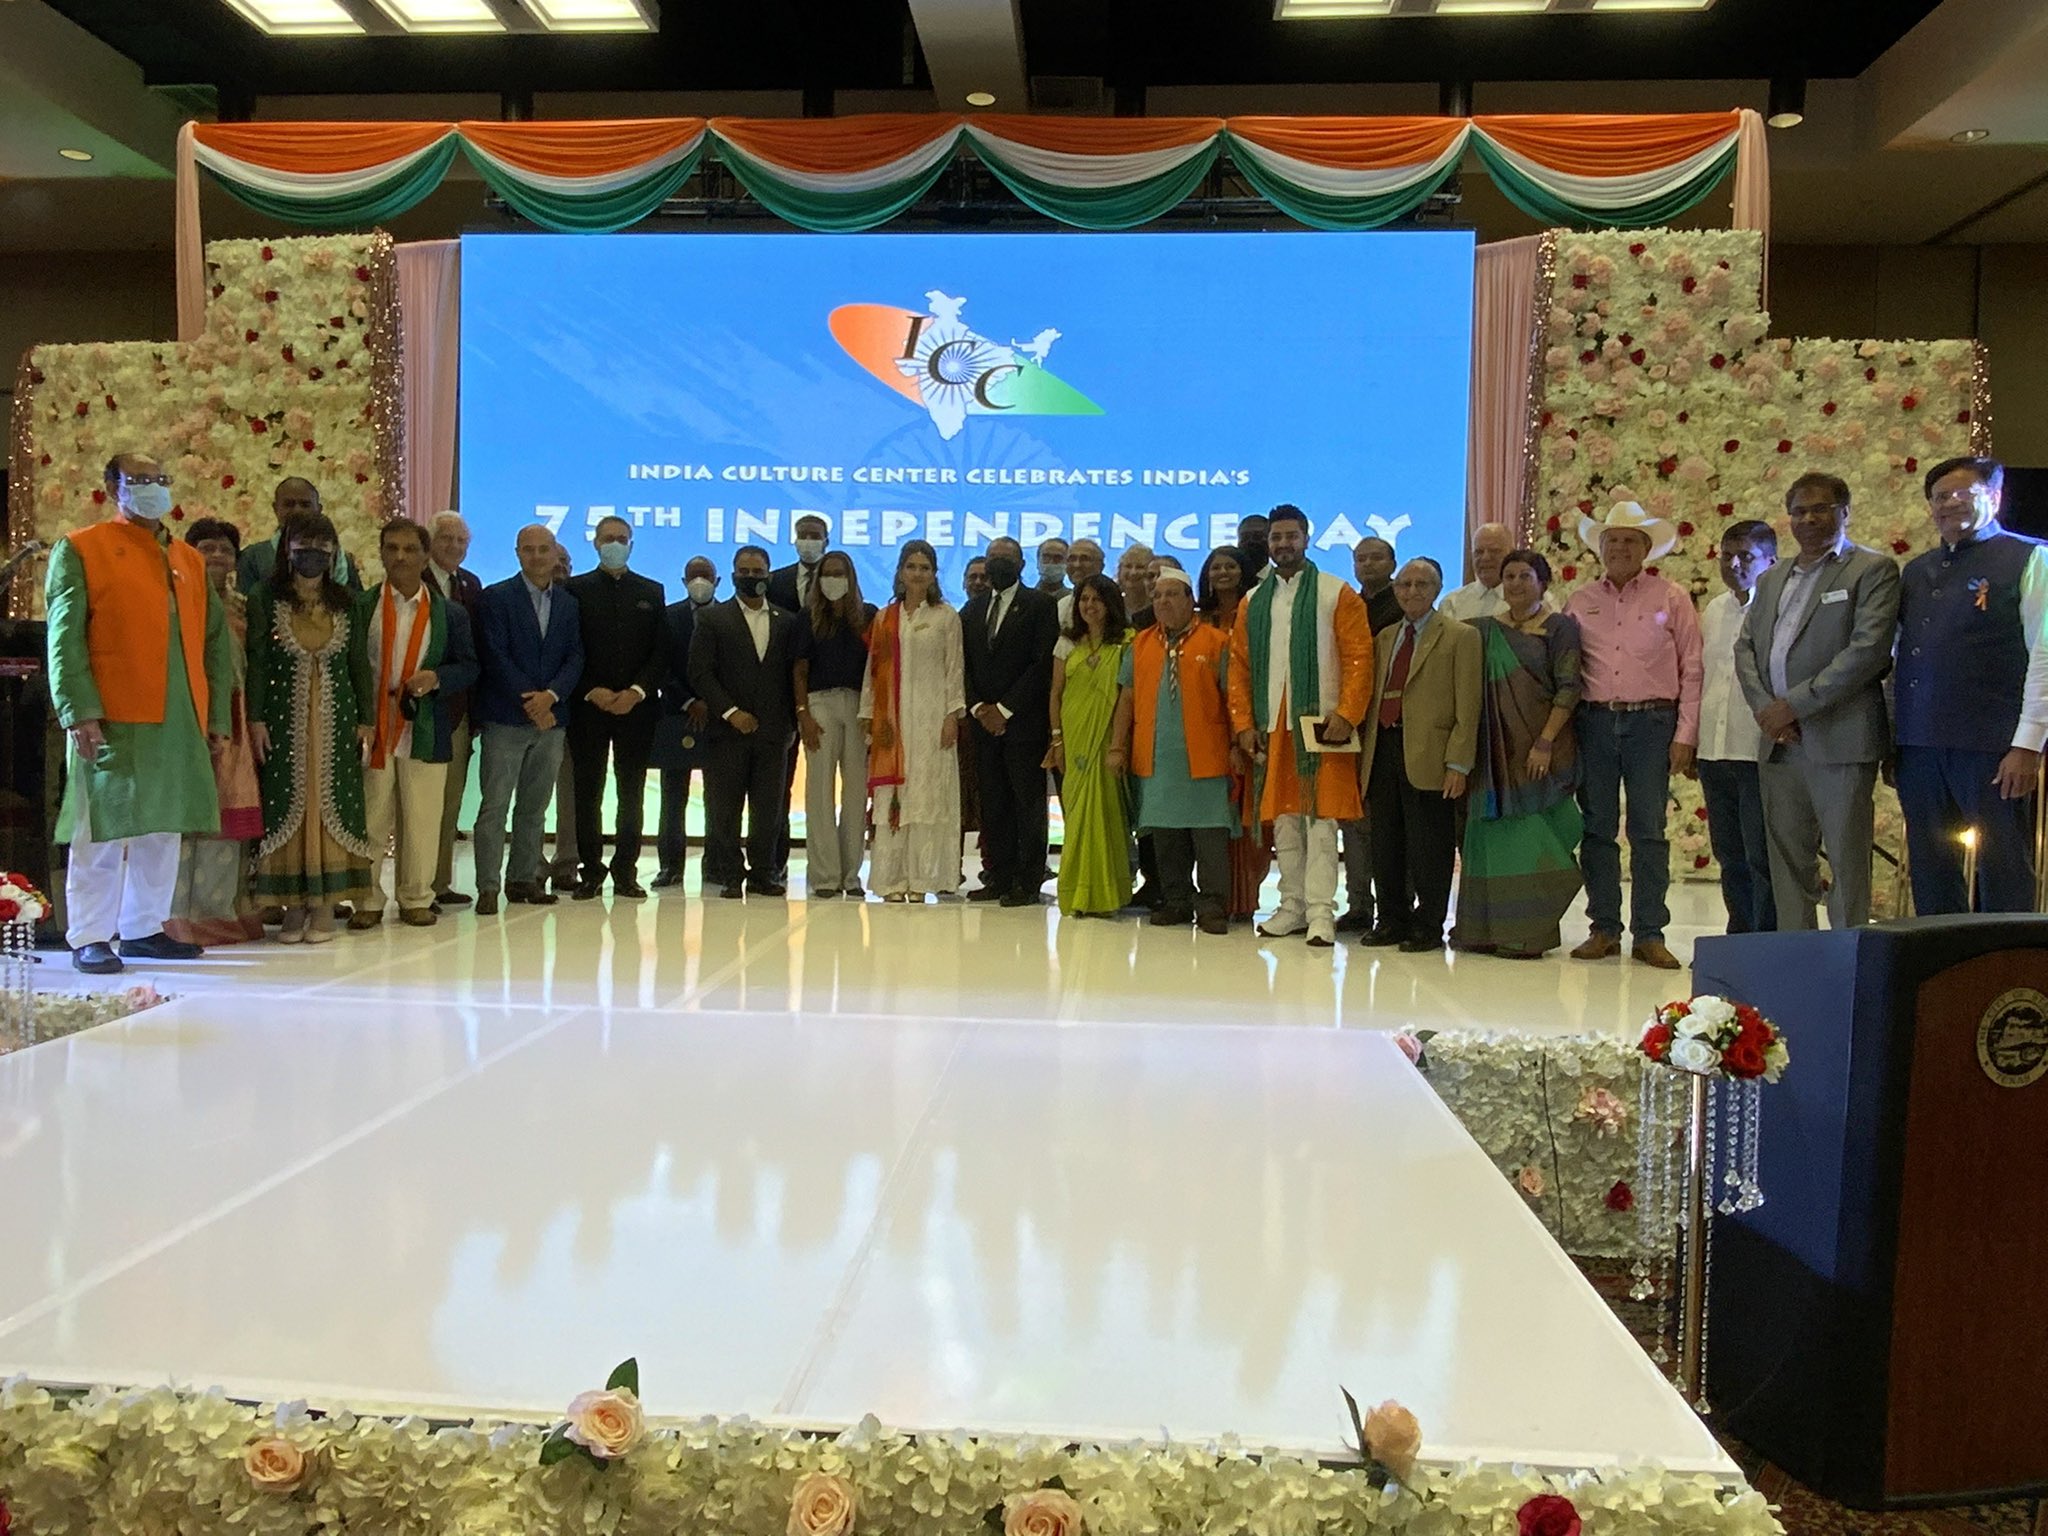 Consul General joined Congressman 
Al Green ,Mayor of Houston Sylvester Turner  and other dignitaries in the Celebration of 75th Independence Day of India at the event organized by the India Culture Centre, Houston on August 15, 2021